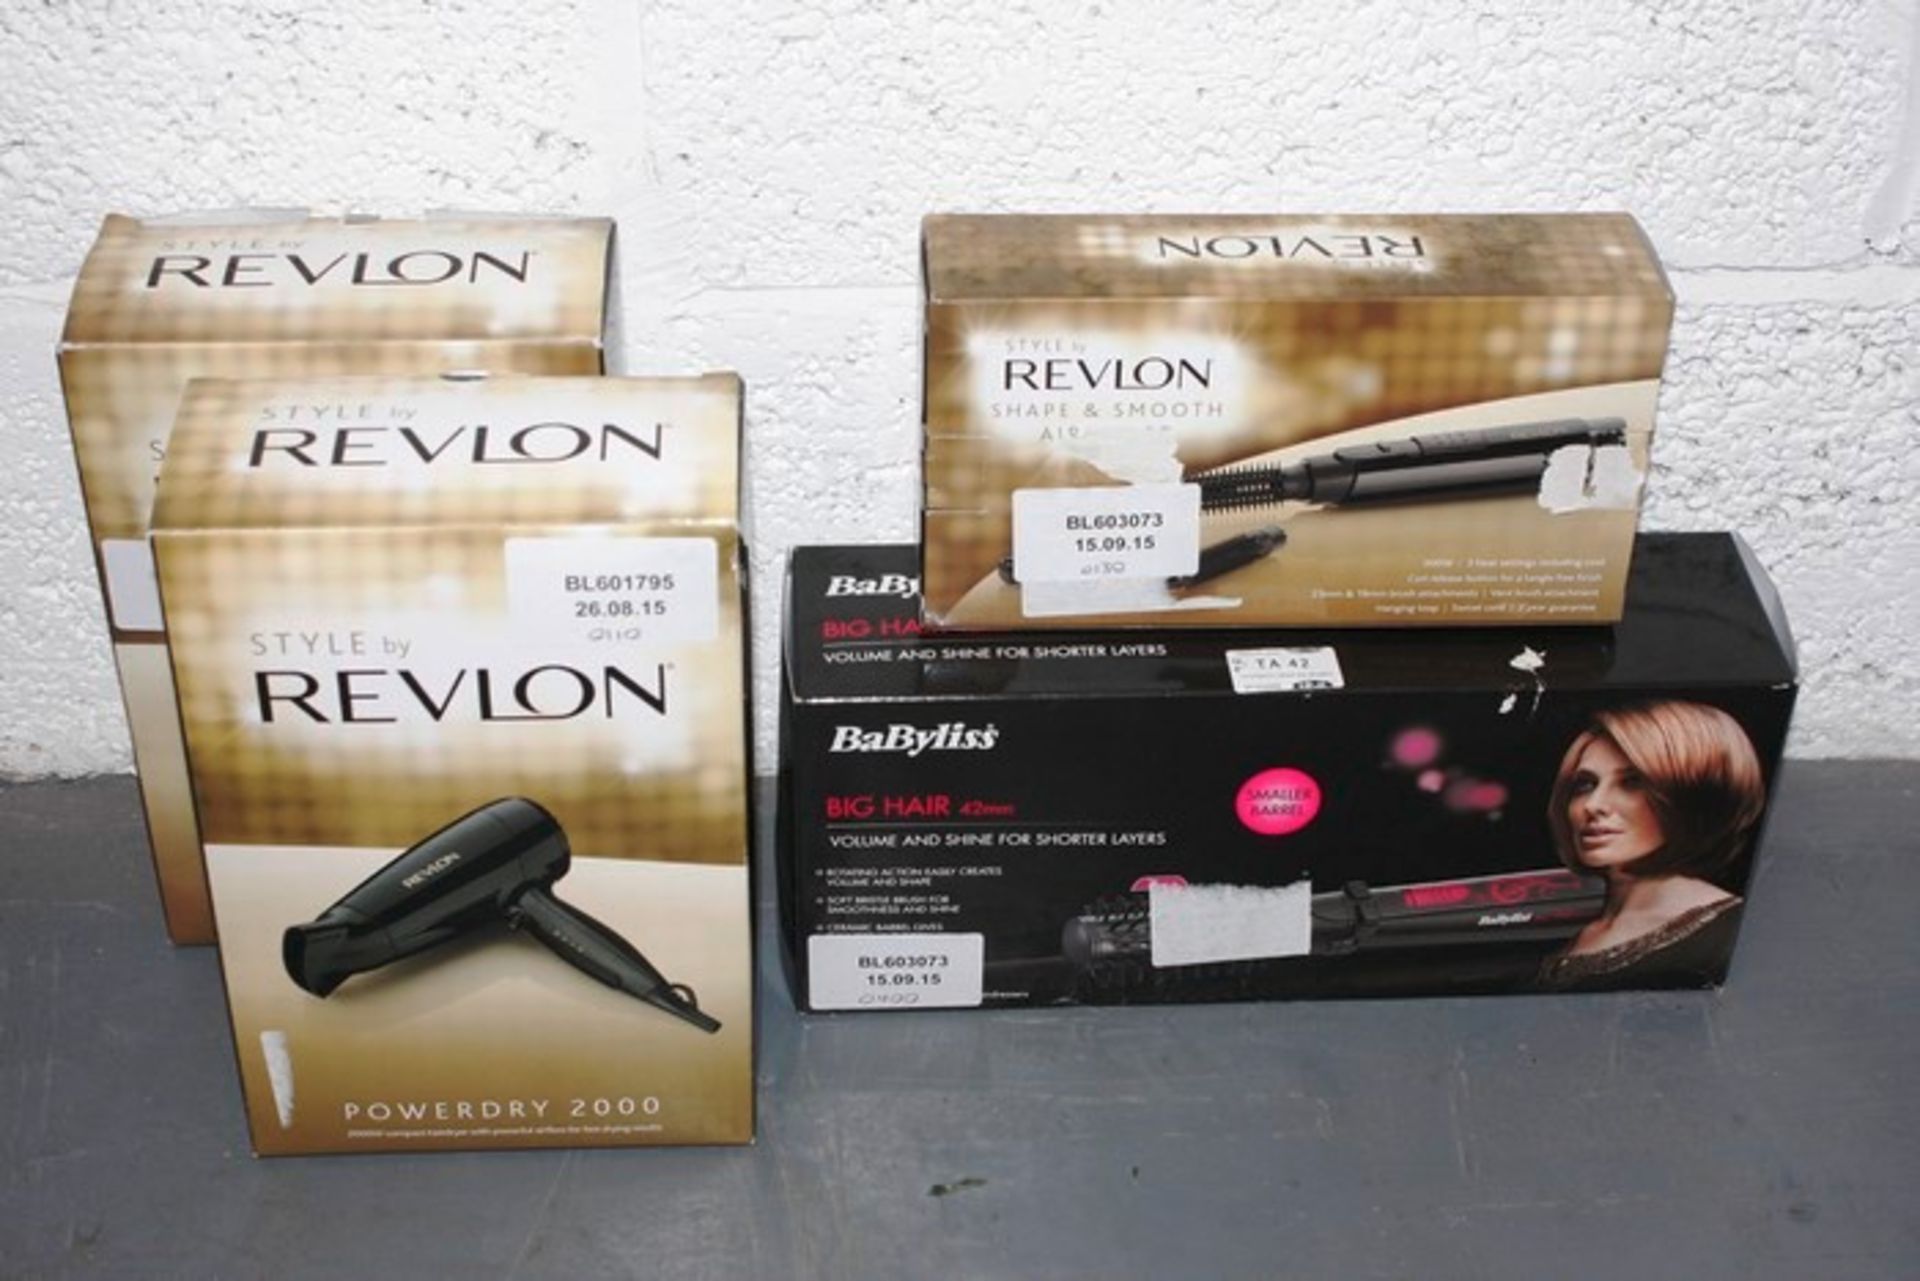 4x BOXED ASSORTED HAIR CARE PRODUCTS TO INCLUDE BABYLISS BIG HAIR CURLERS REVLON HAIRDRYERS AND